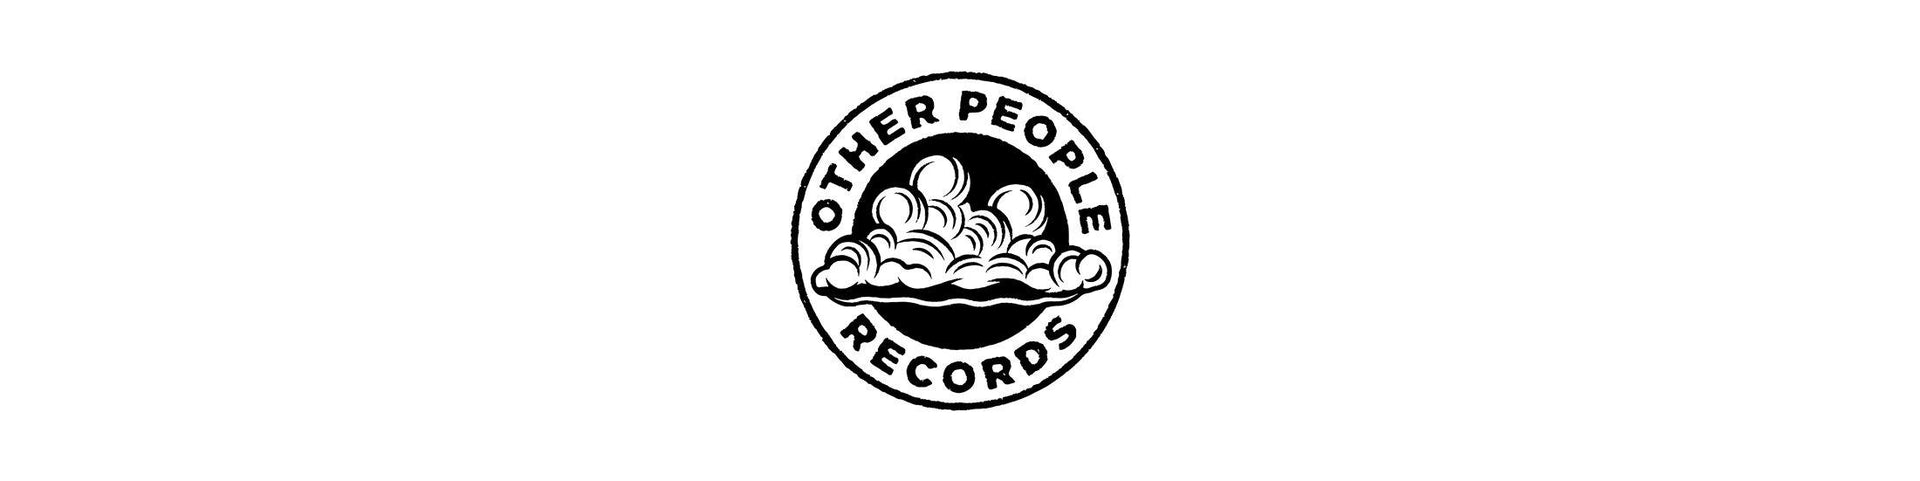 Shop – Other People Records – Band & Music Merch – Cold Cuts Merch